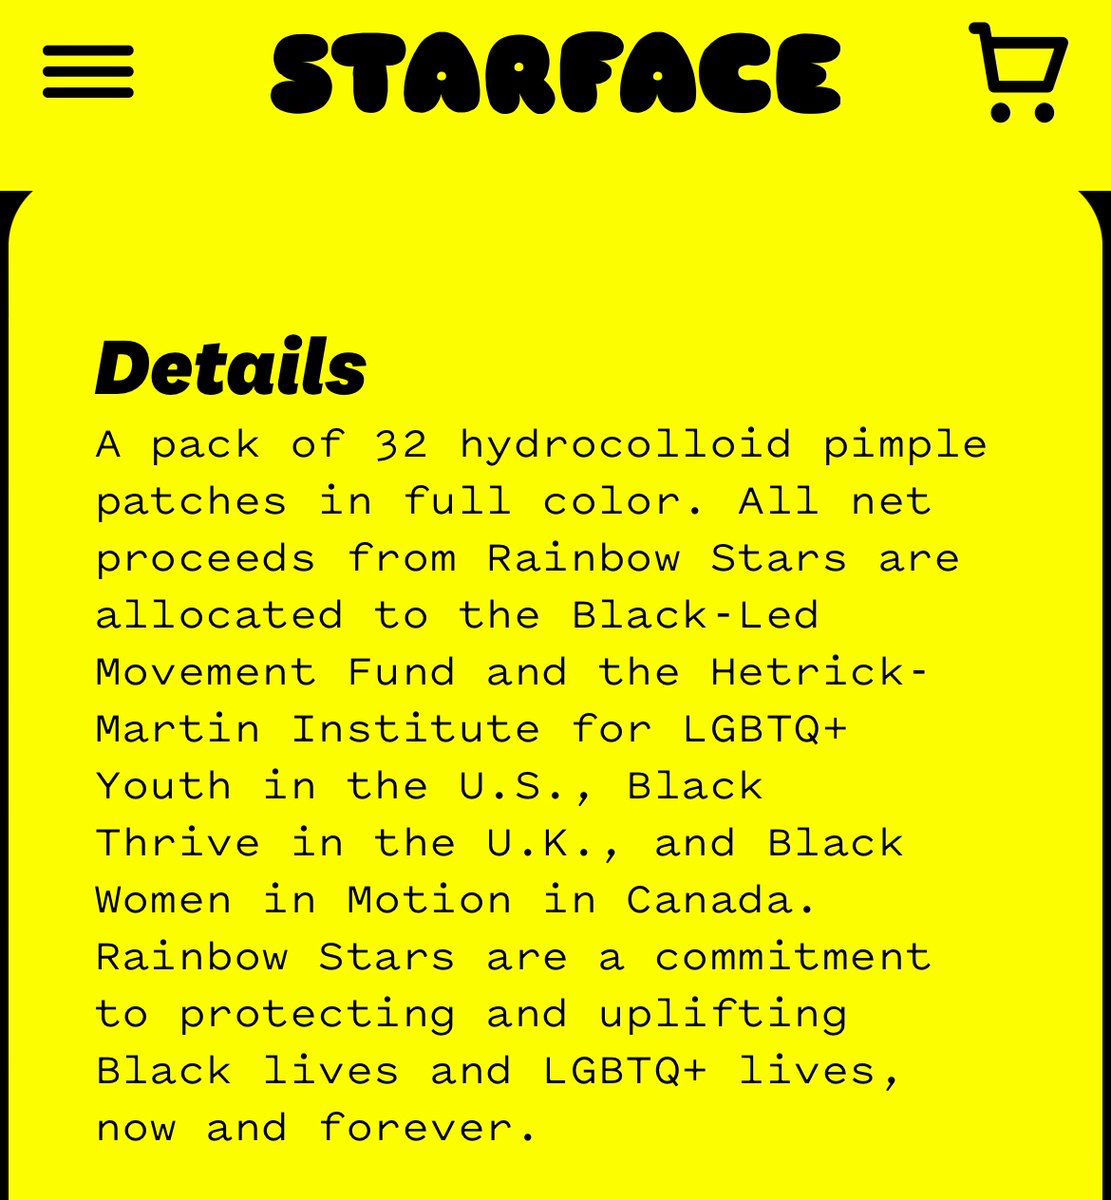 Justin Bieber is also a long time supporter of the ‘It gets better Project’ focused on providing a better life to LGBTQ youth.

He also uses the 'starface pimple patches' that donate all net proceeds to support black LGBTQ youth.